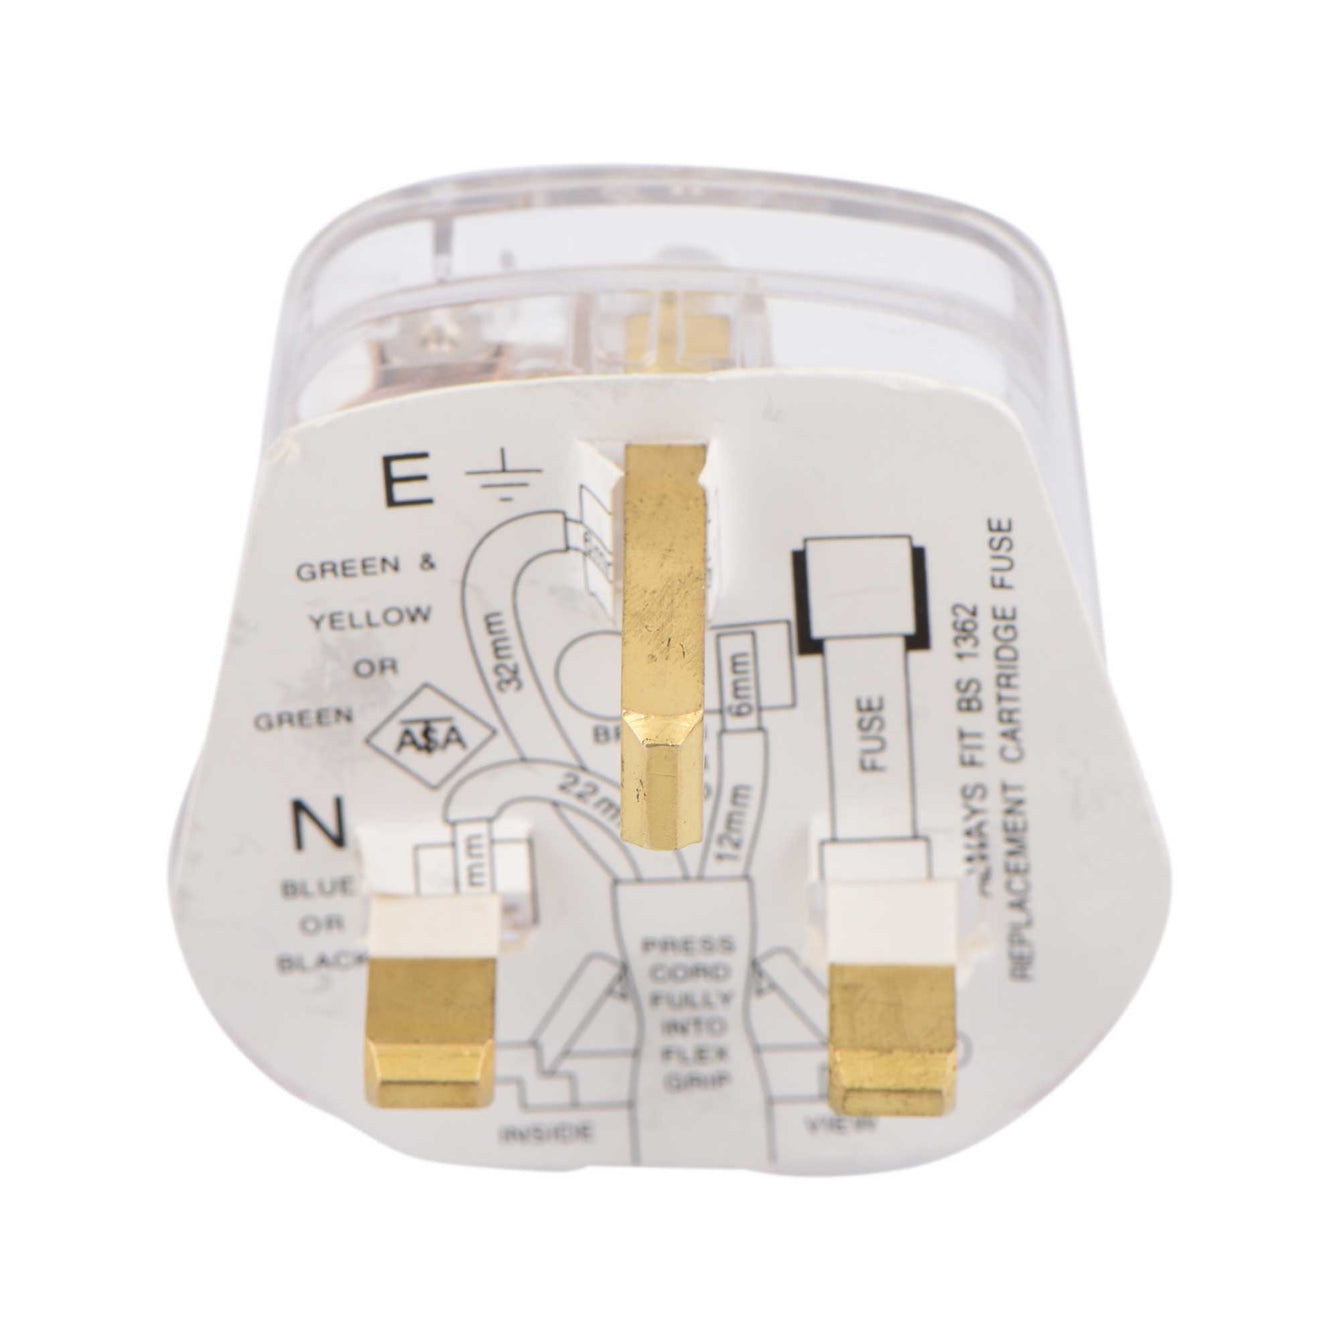 ElekTek 13A Plug Top with 3A Fuse Fitted Colours - Buy It Better 